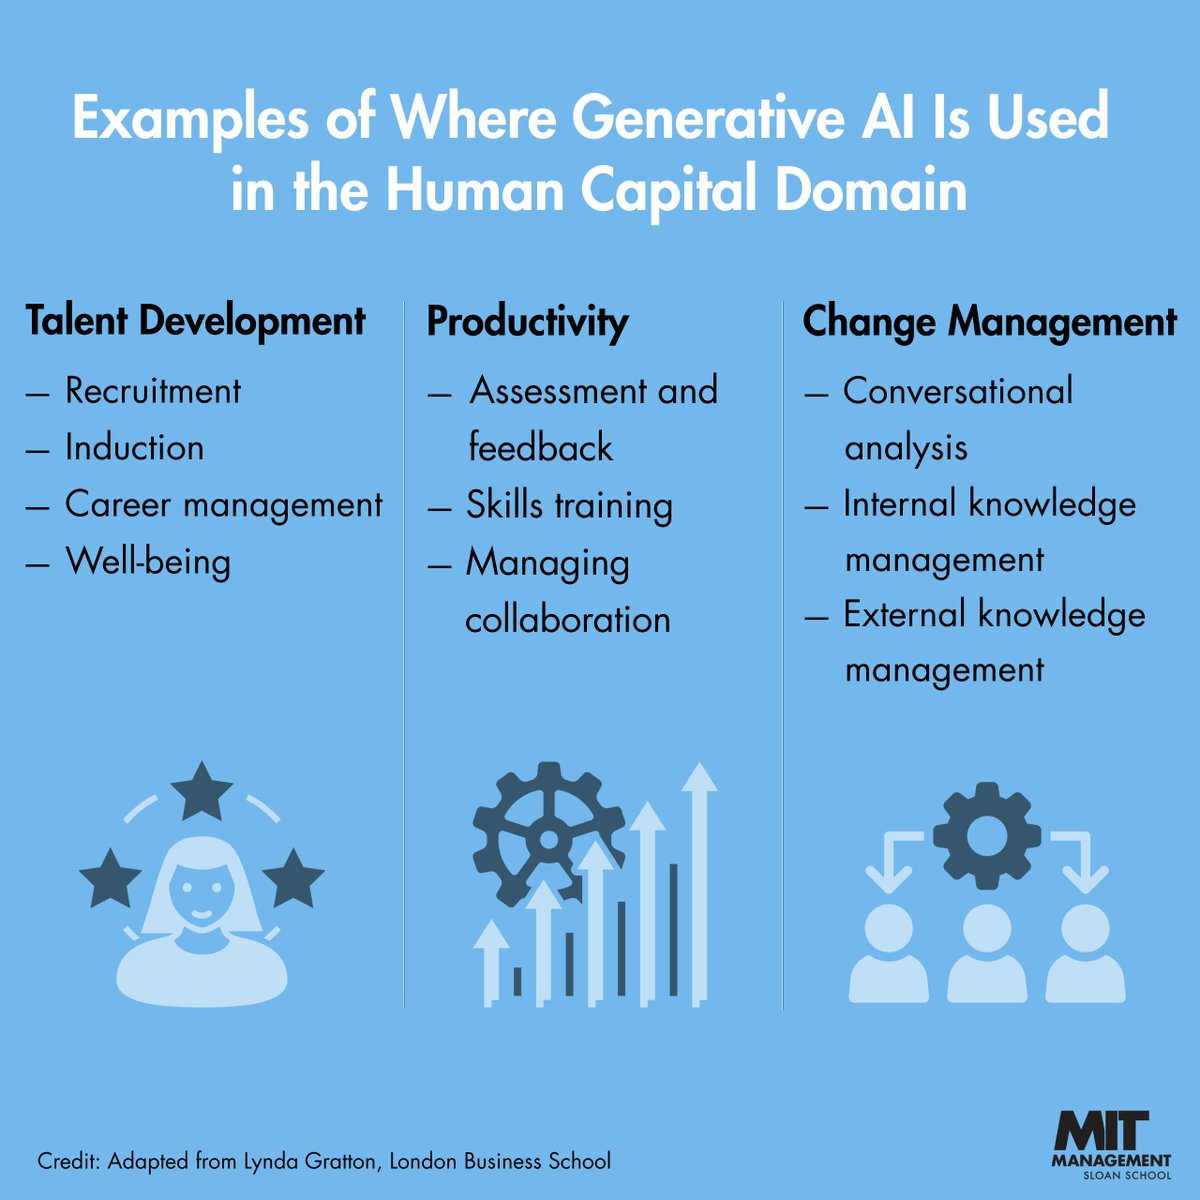 Generative AI leaders could encourage use of the technology, in part, to help with managing employees. This encompasses three key areas: talent development, productivity, and change management. mitsloan.co/3PDMZf2